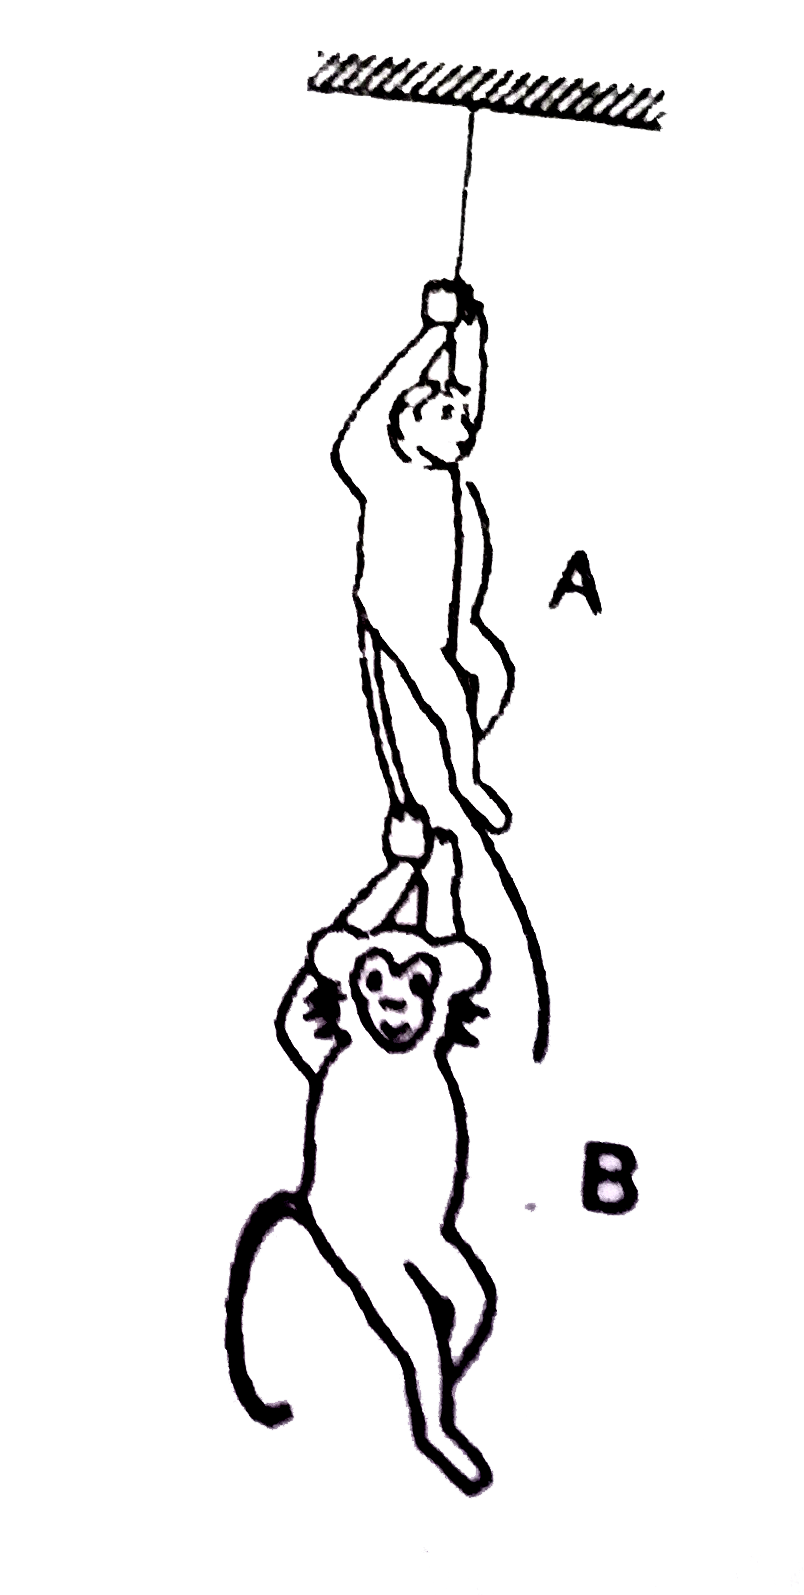 The monkey B shown in fig. is holding on to the tall of the monkey A which is climbing up a rope. The masses of the monkeys A and B are 5 kg and 2kg respectively. If A can tolerate a tension of 30N in its tall, what force should it apply on the rope in order to carry the monkey B with it ?   (Take g=10 ms^(-2))